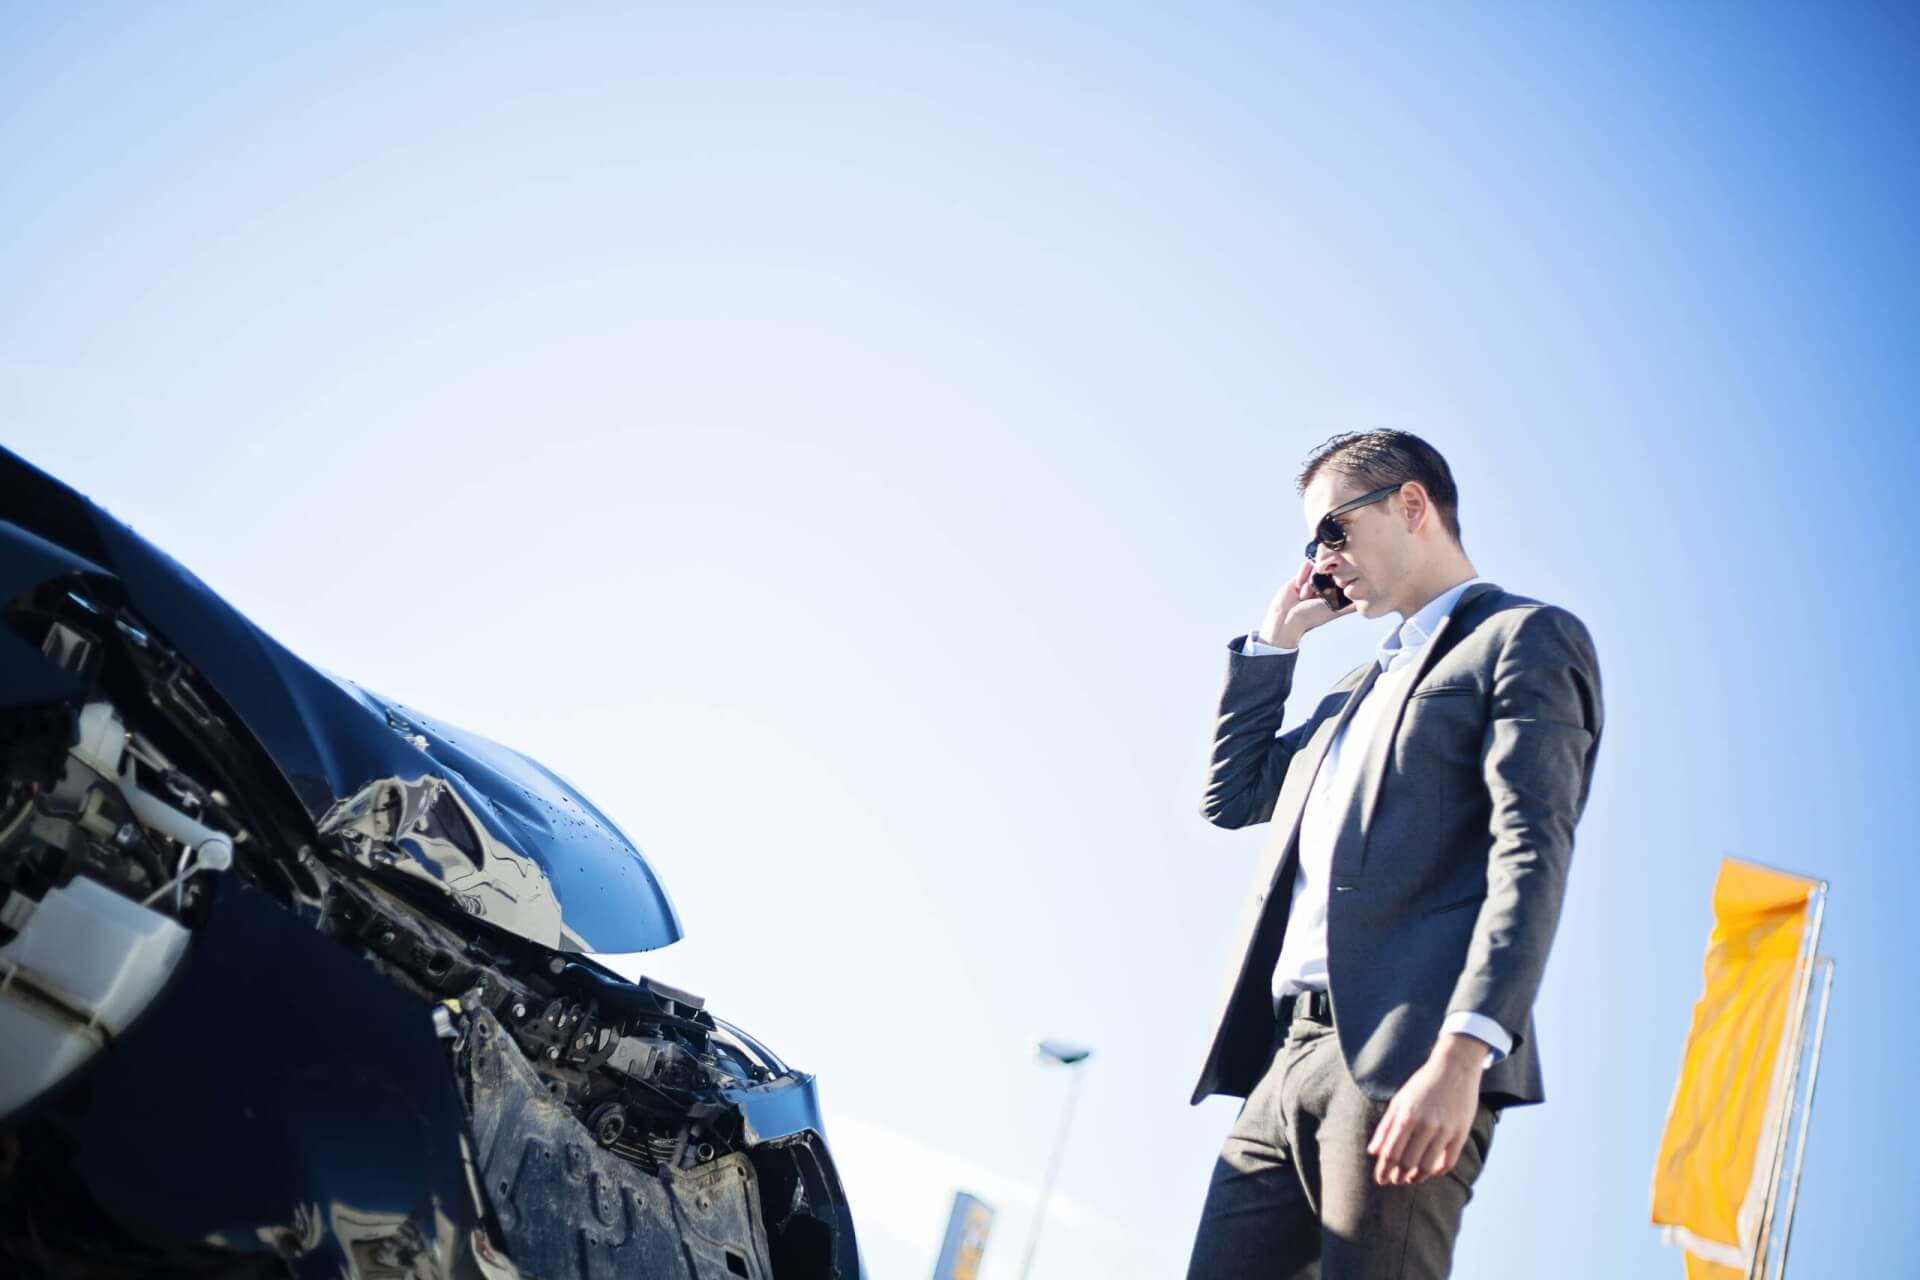 Personal Injury Attorneys: Steps To Take If You’ve Been Injured